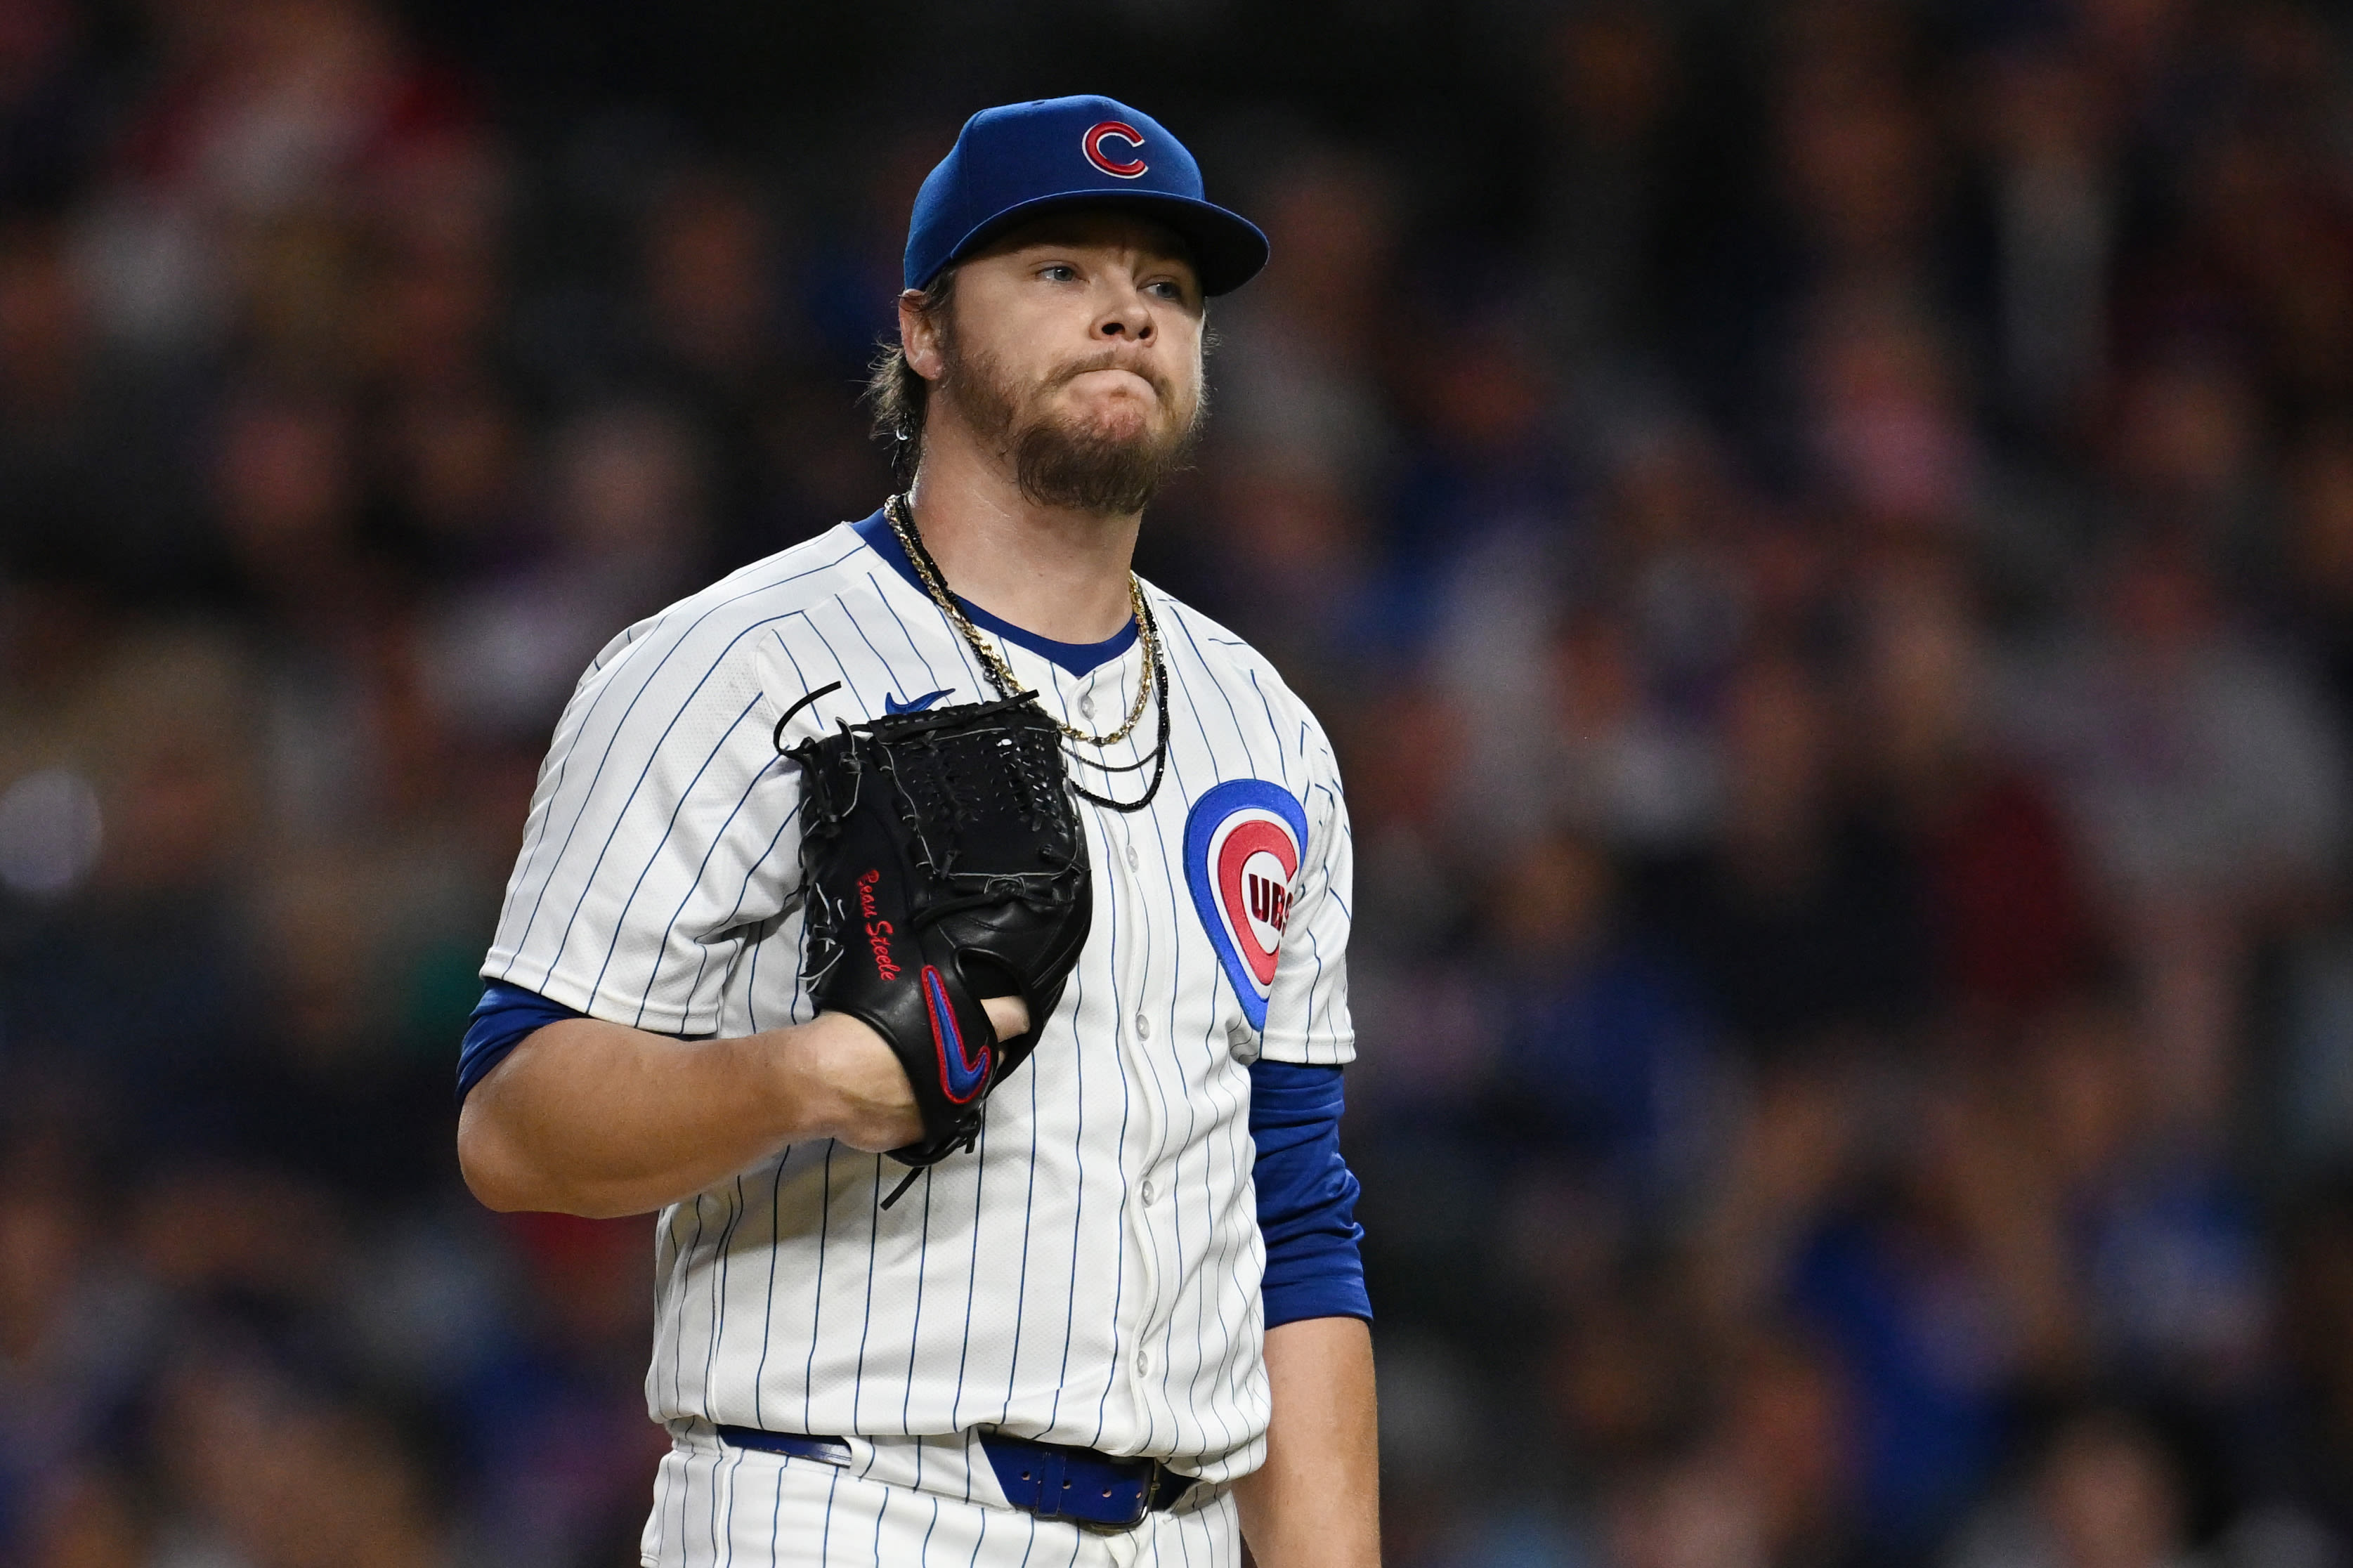 Cubs lefty Justin Steele's start 'probably better than the line' as Cubs lose 5-4 to Pirates